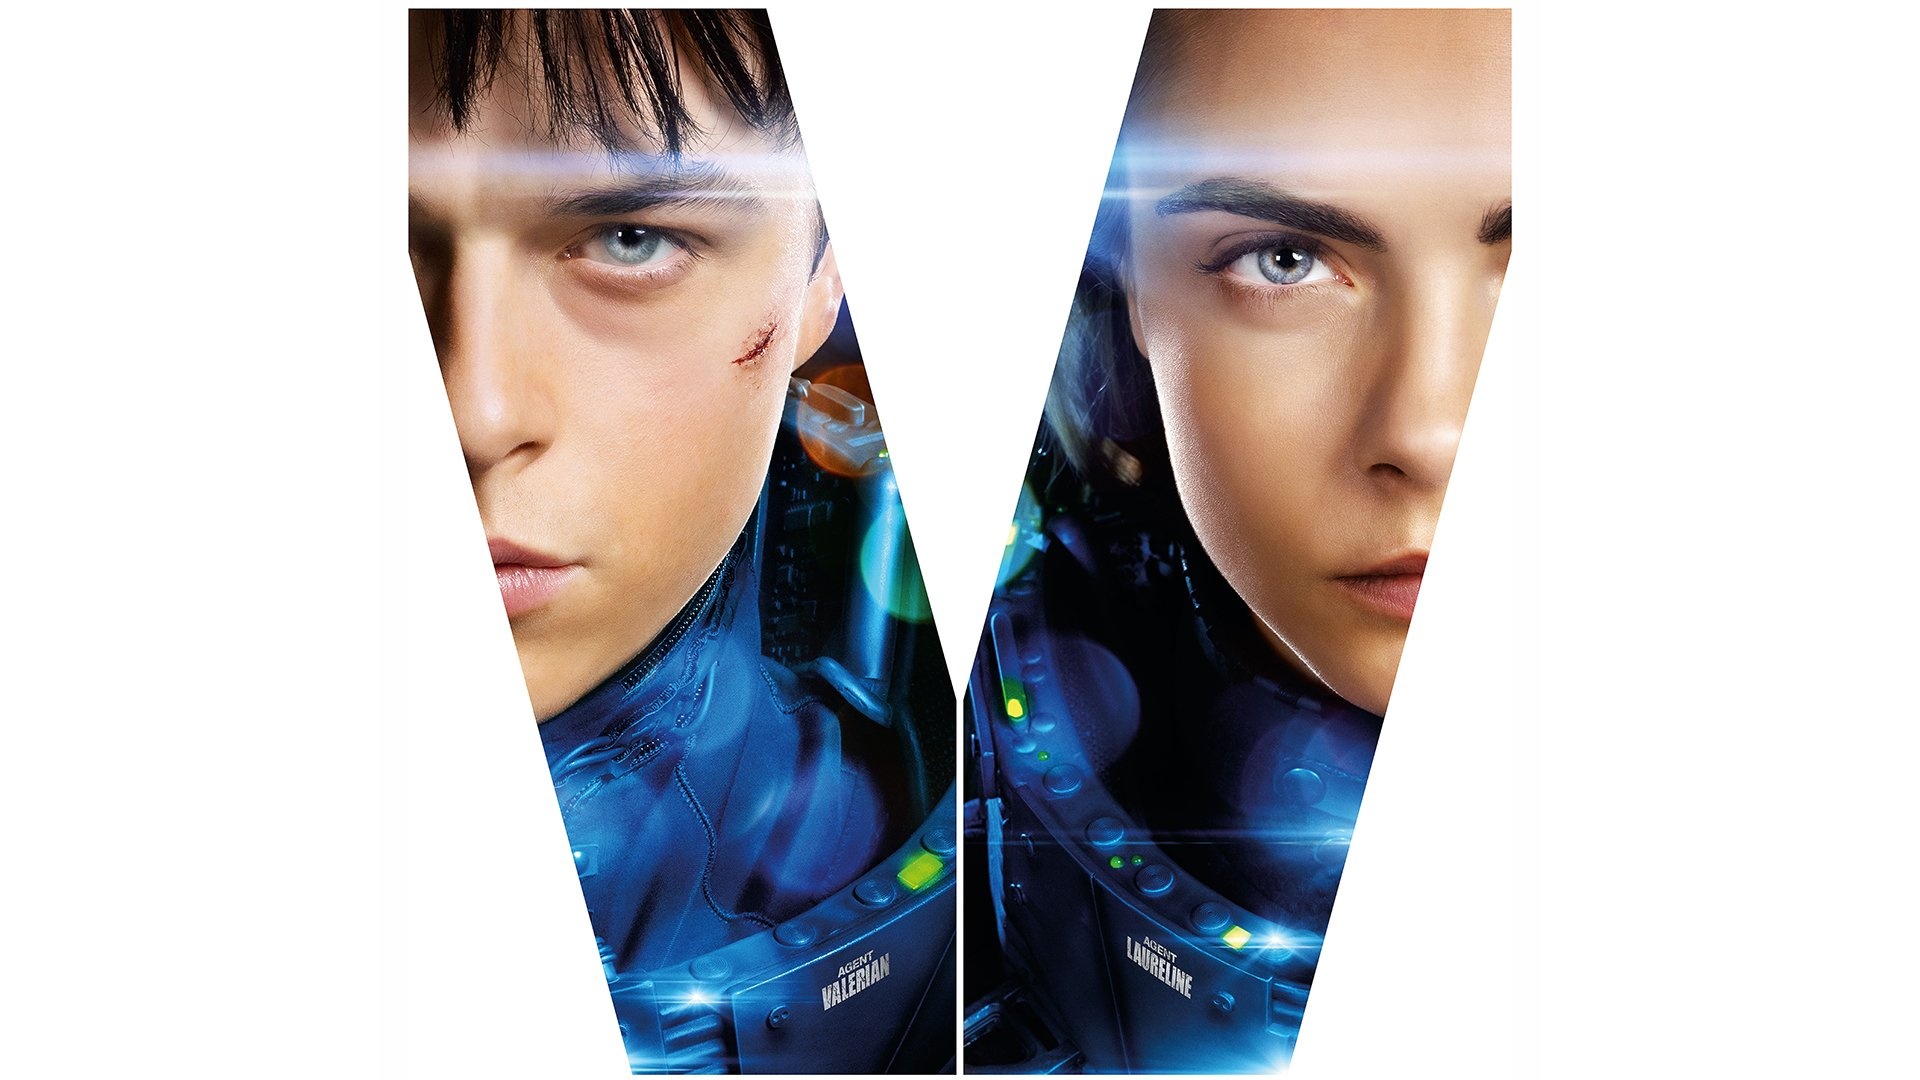 Valerian, City of a Thousand Planets, HD wallpapers, Background images, 1920x1080 Full HD Desktop